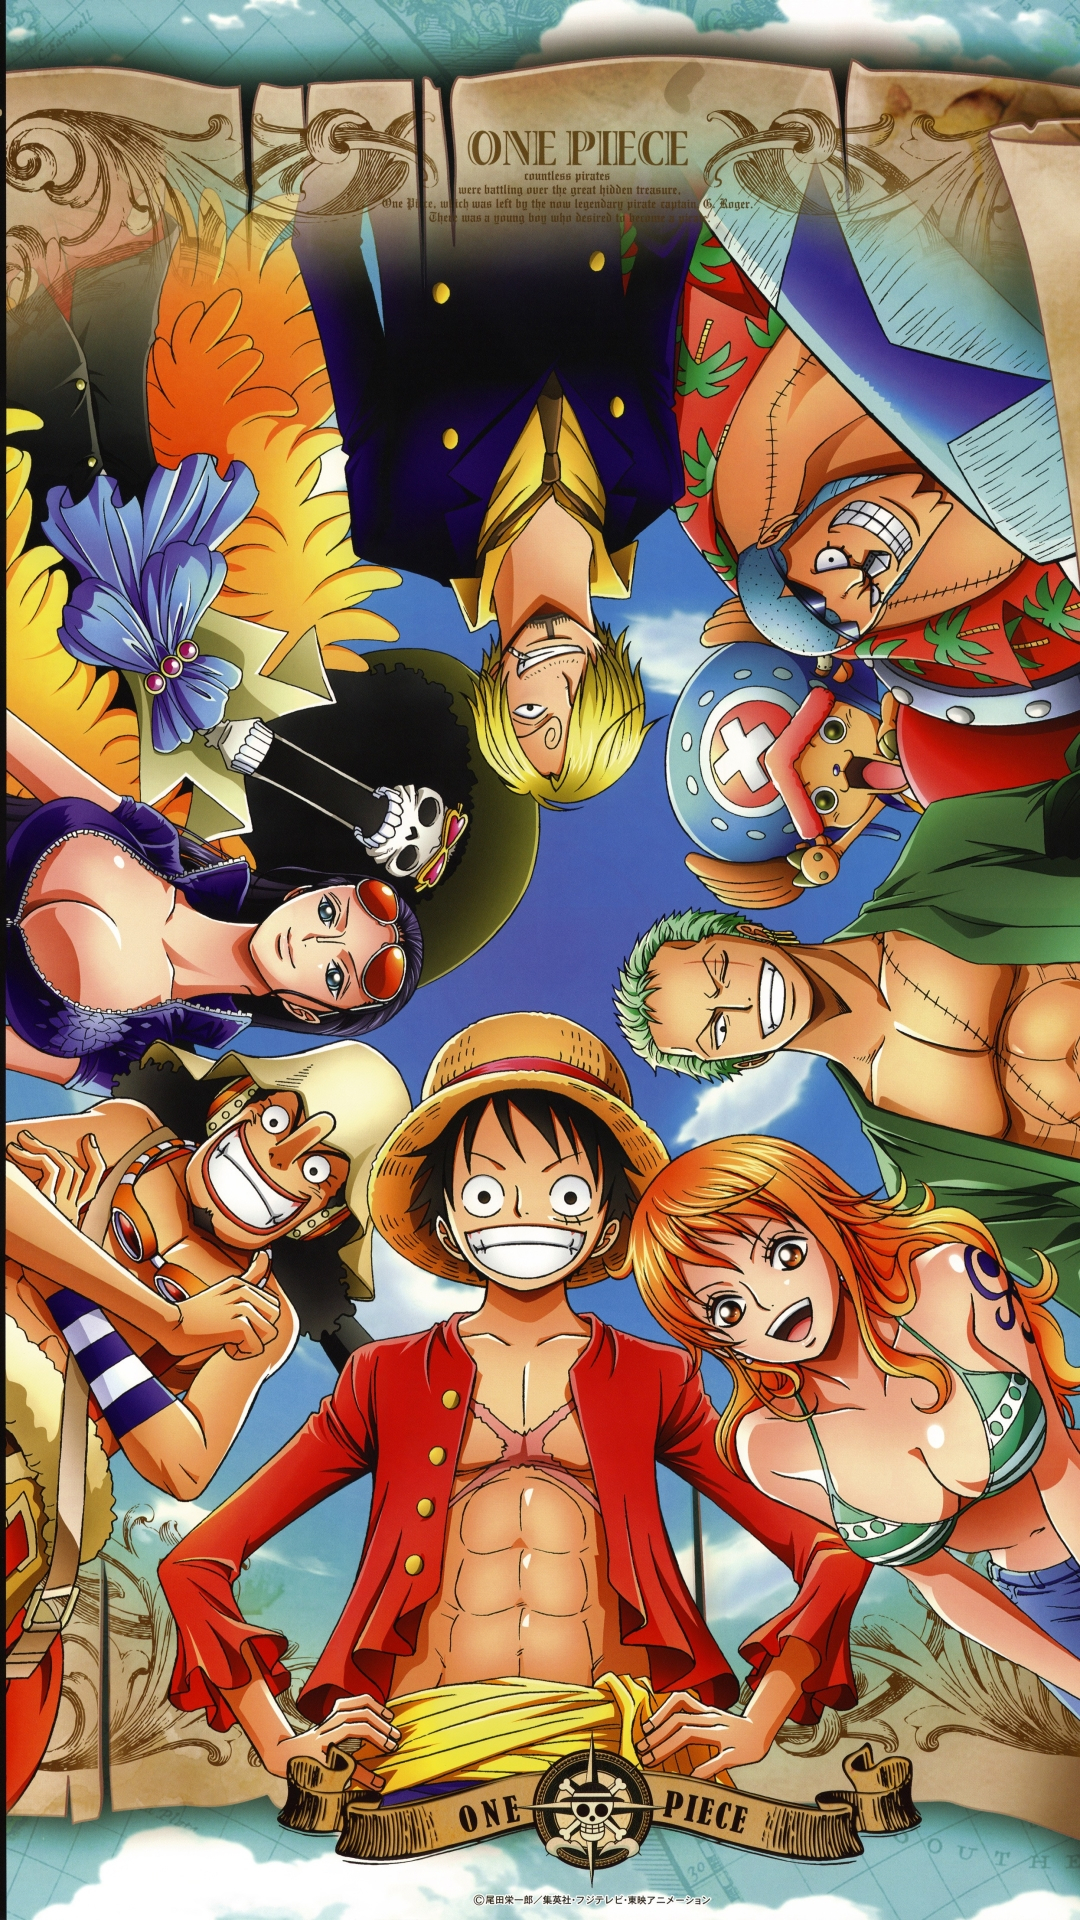 One Piece Video Wallpaper Android